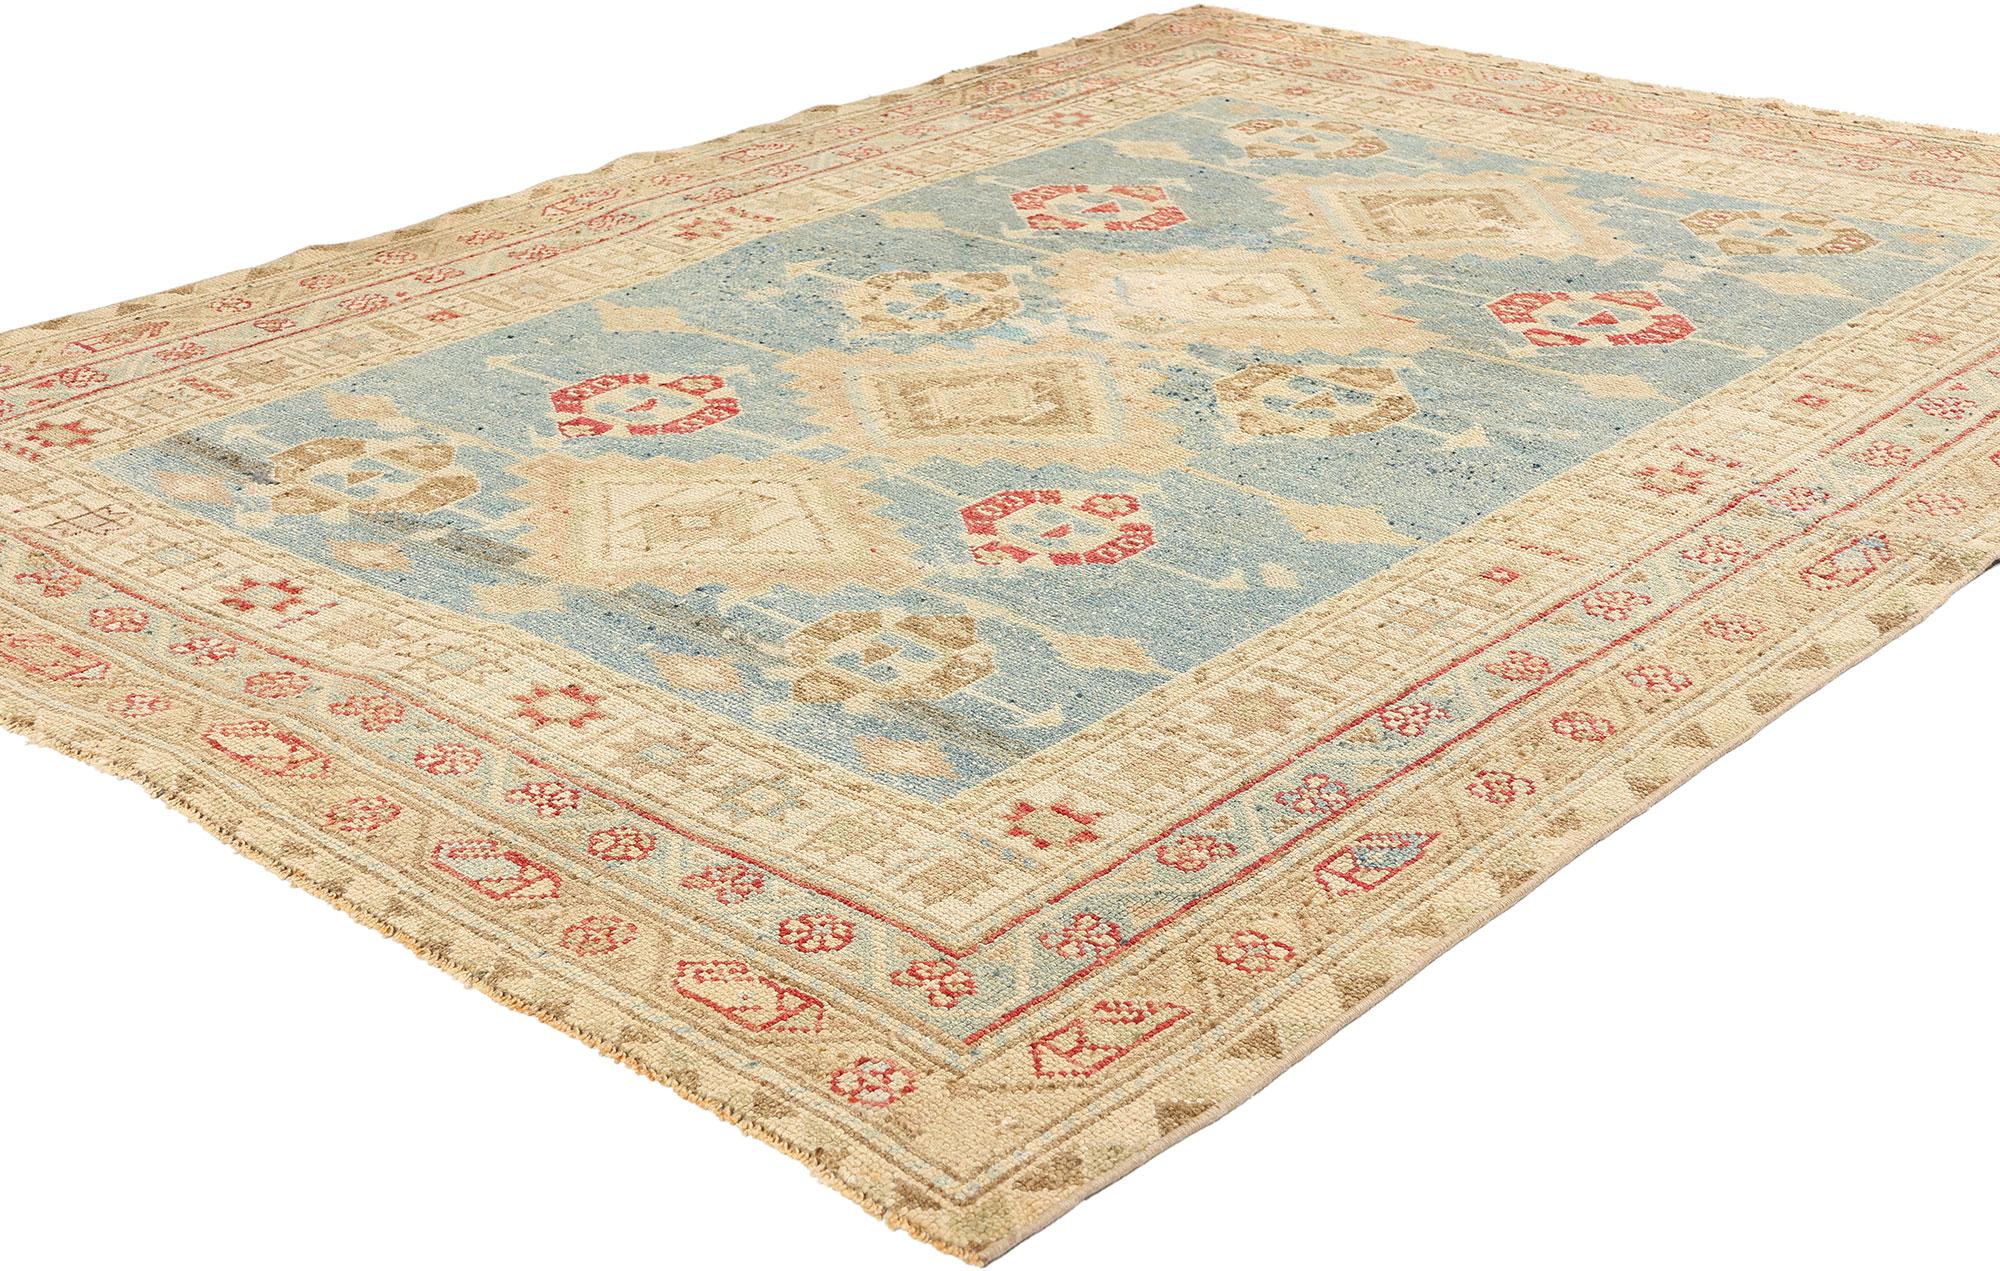 53770 Antique Light Blue Persian Shiraz Rug, 05'02 x 06'09. Antique-washed Persian Shiraz rugs are a variation of traditional Persian Shiraz rugs that undergo a special washing process to soften their colors and give them an aged or antique